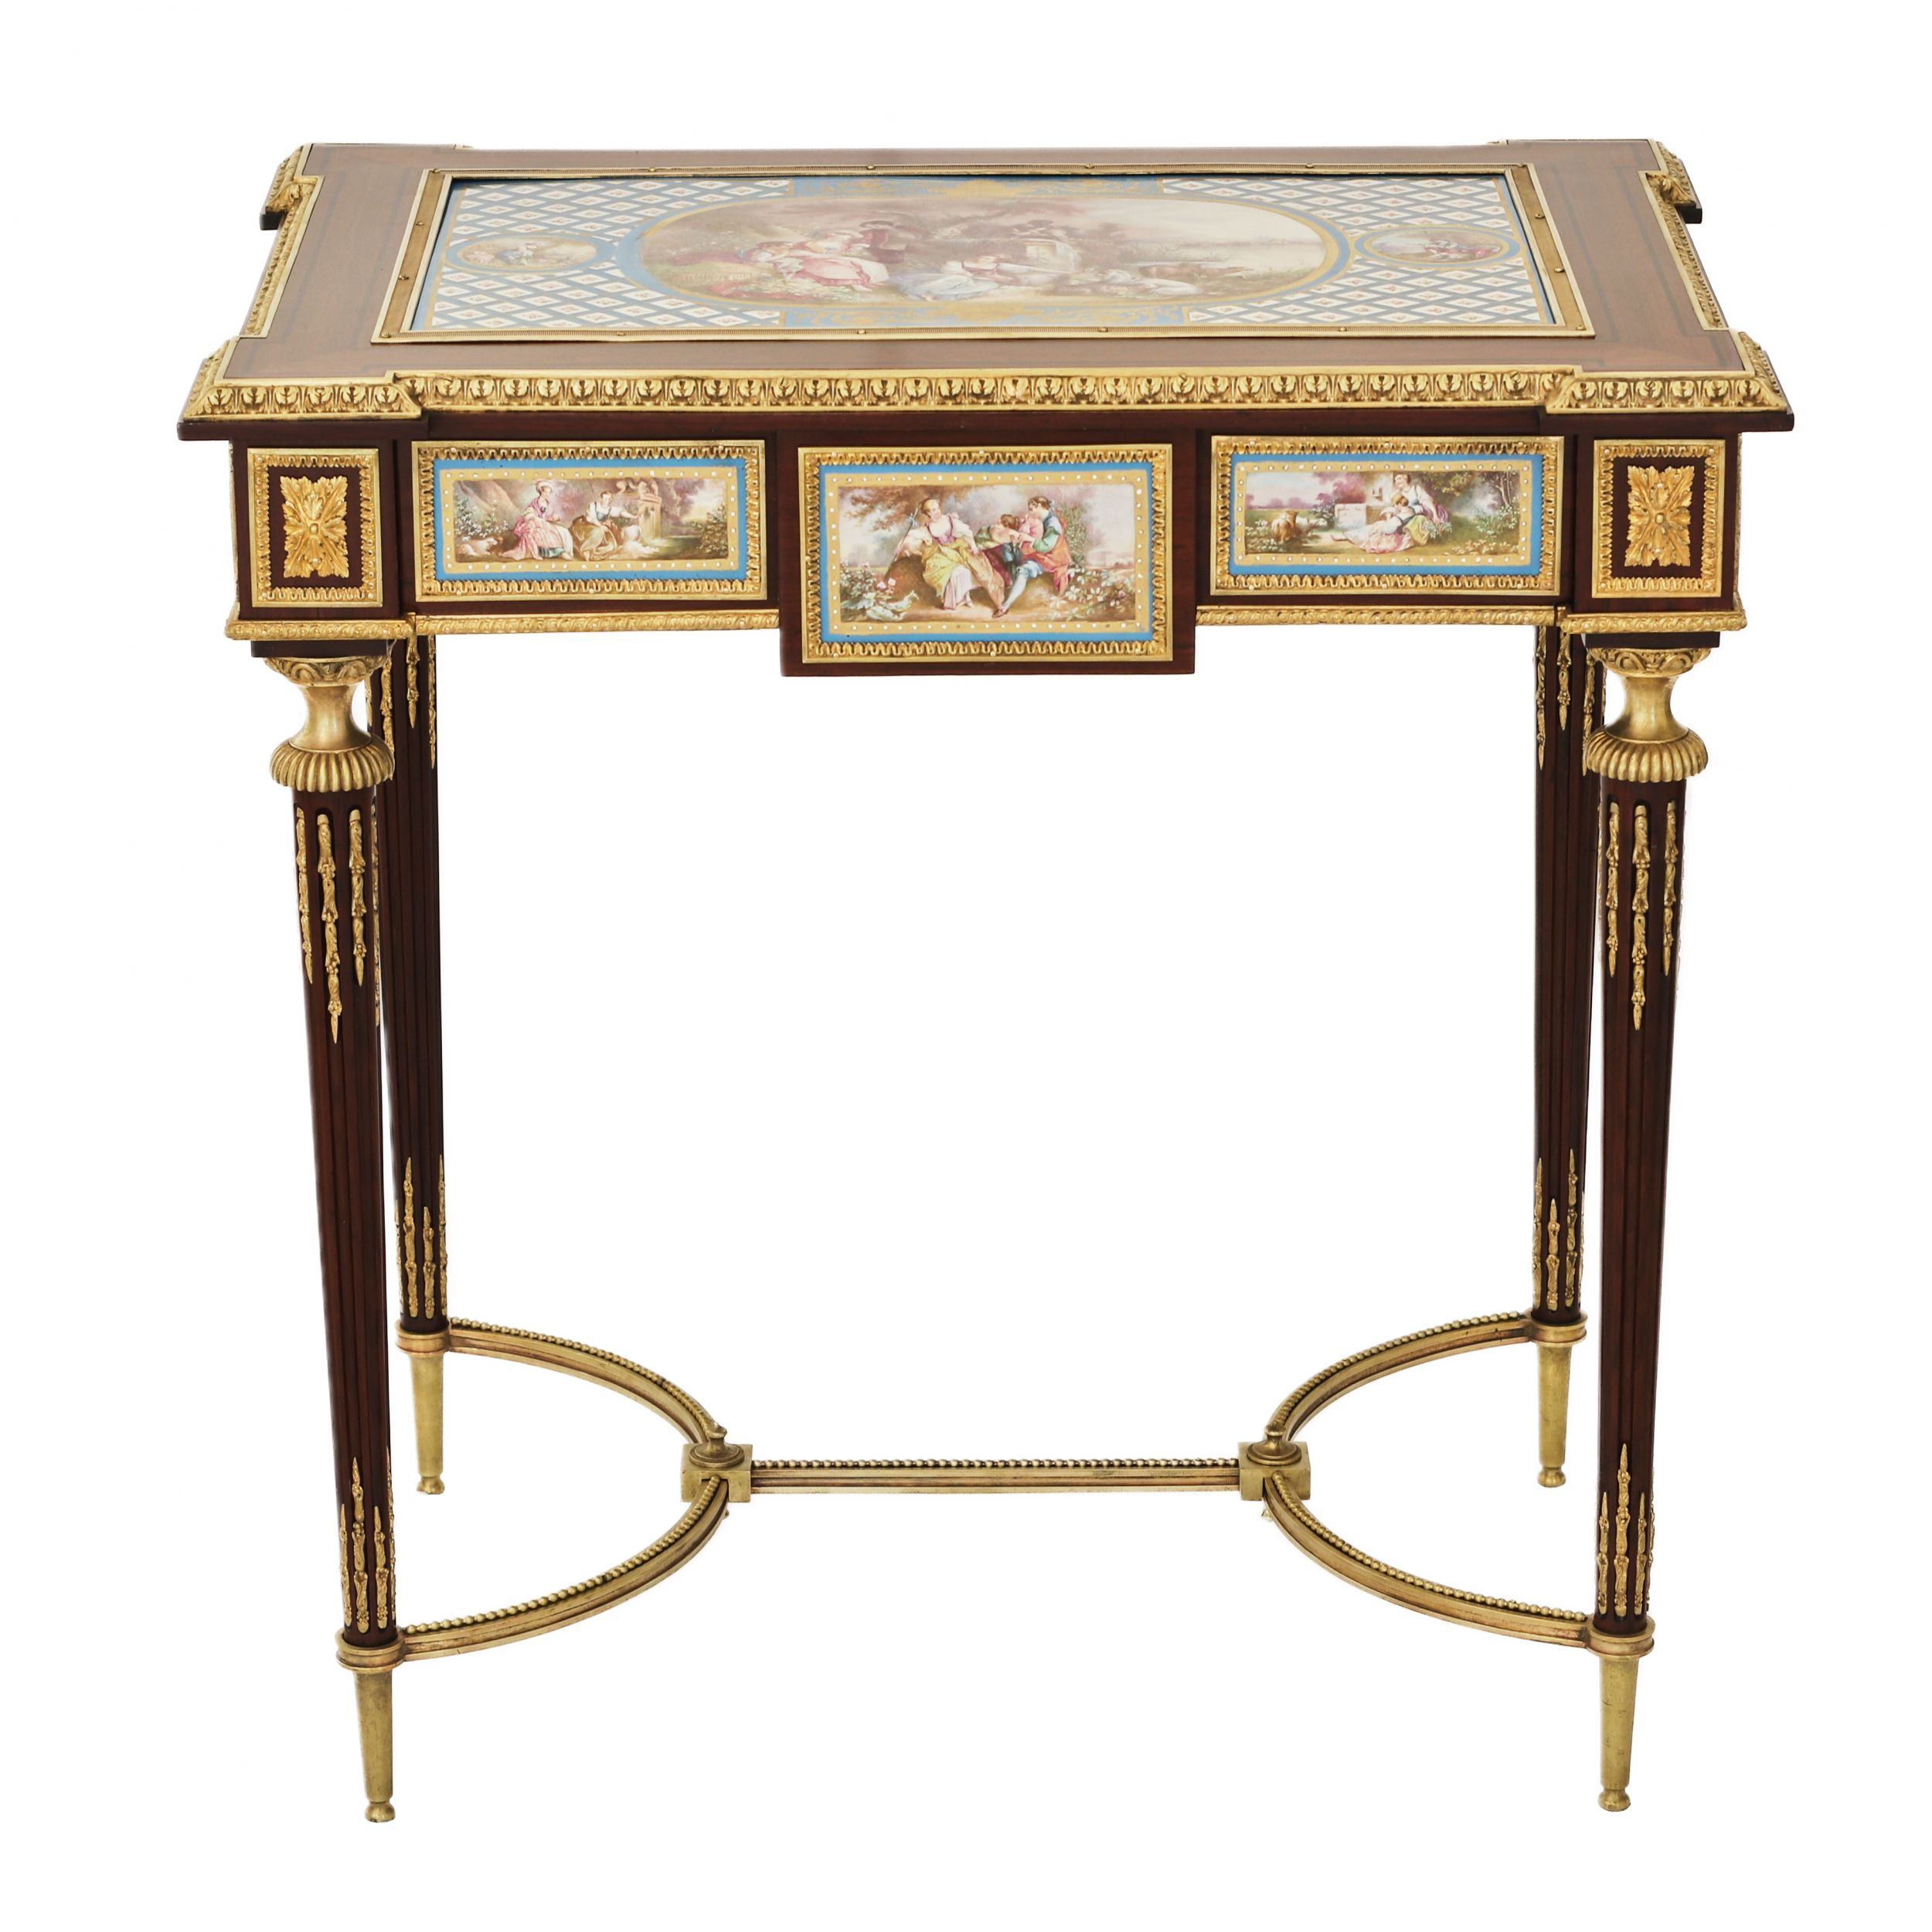 A magnificent ladies table with gilded bronze decor and porcelain panels in the style of Adam Weiswe - Image 2 of 12